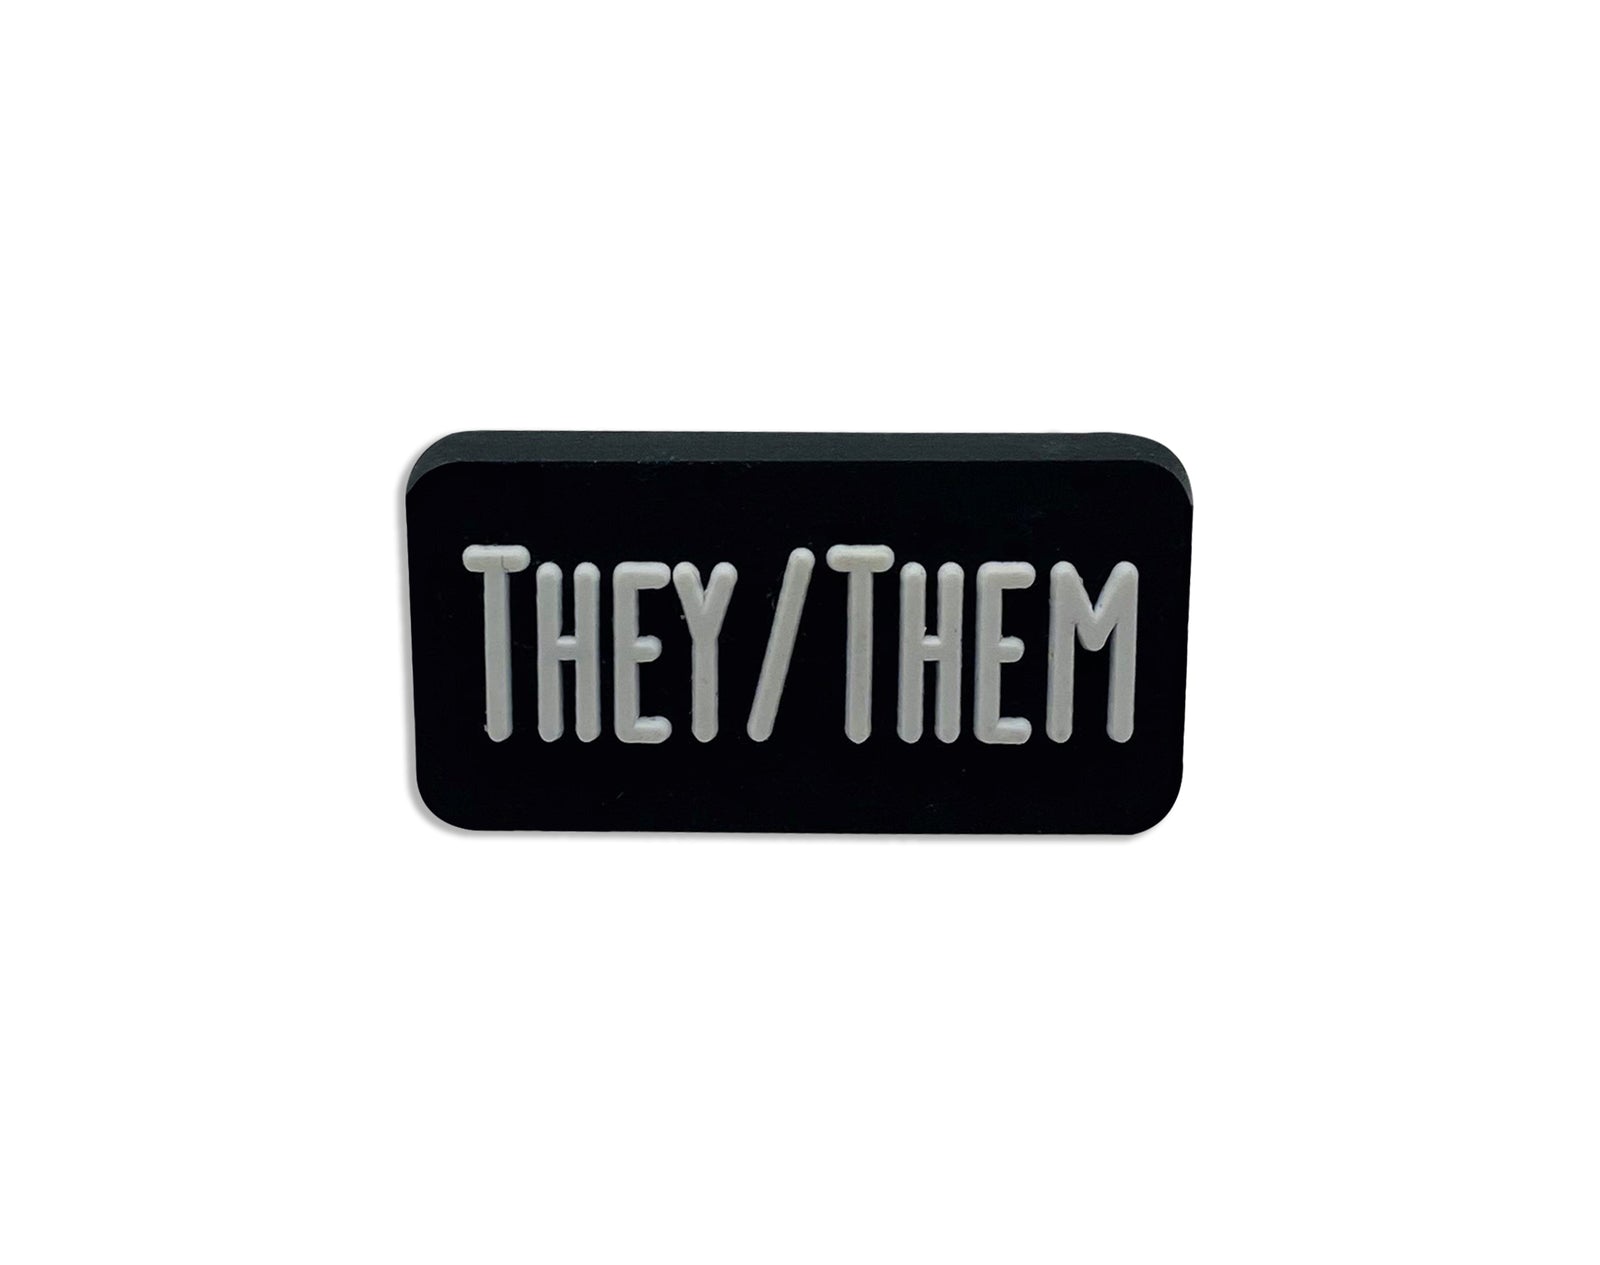 They Them Black Rectangle Silicone Pronoun Pins for Gay Pride